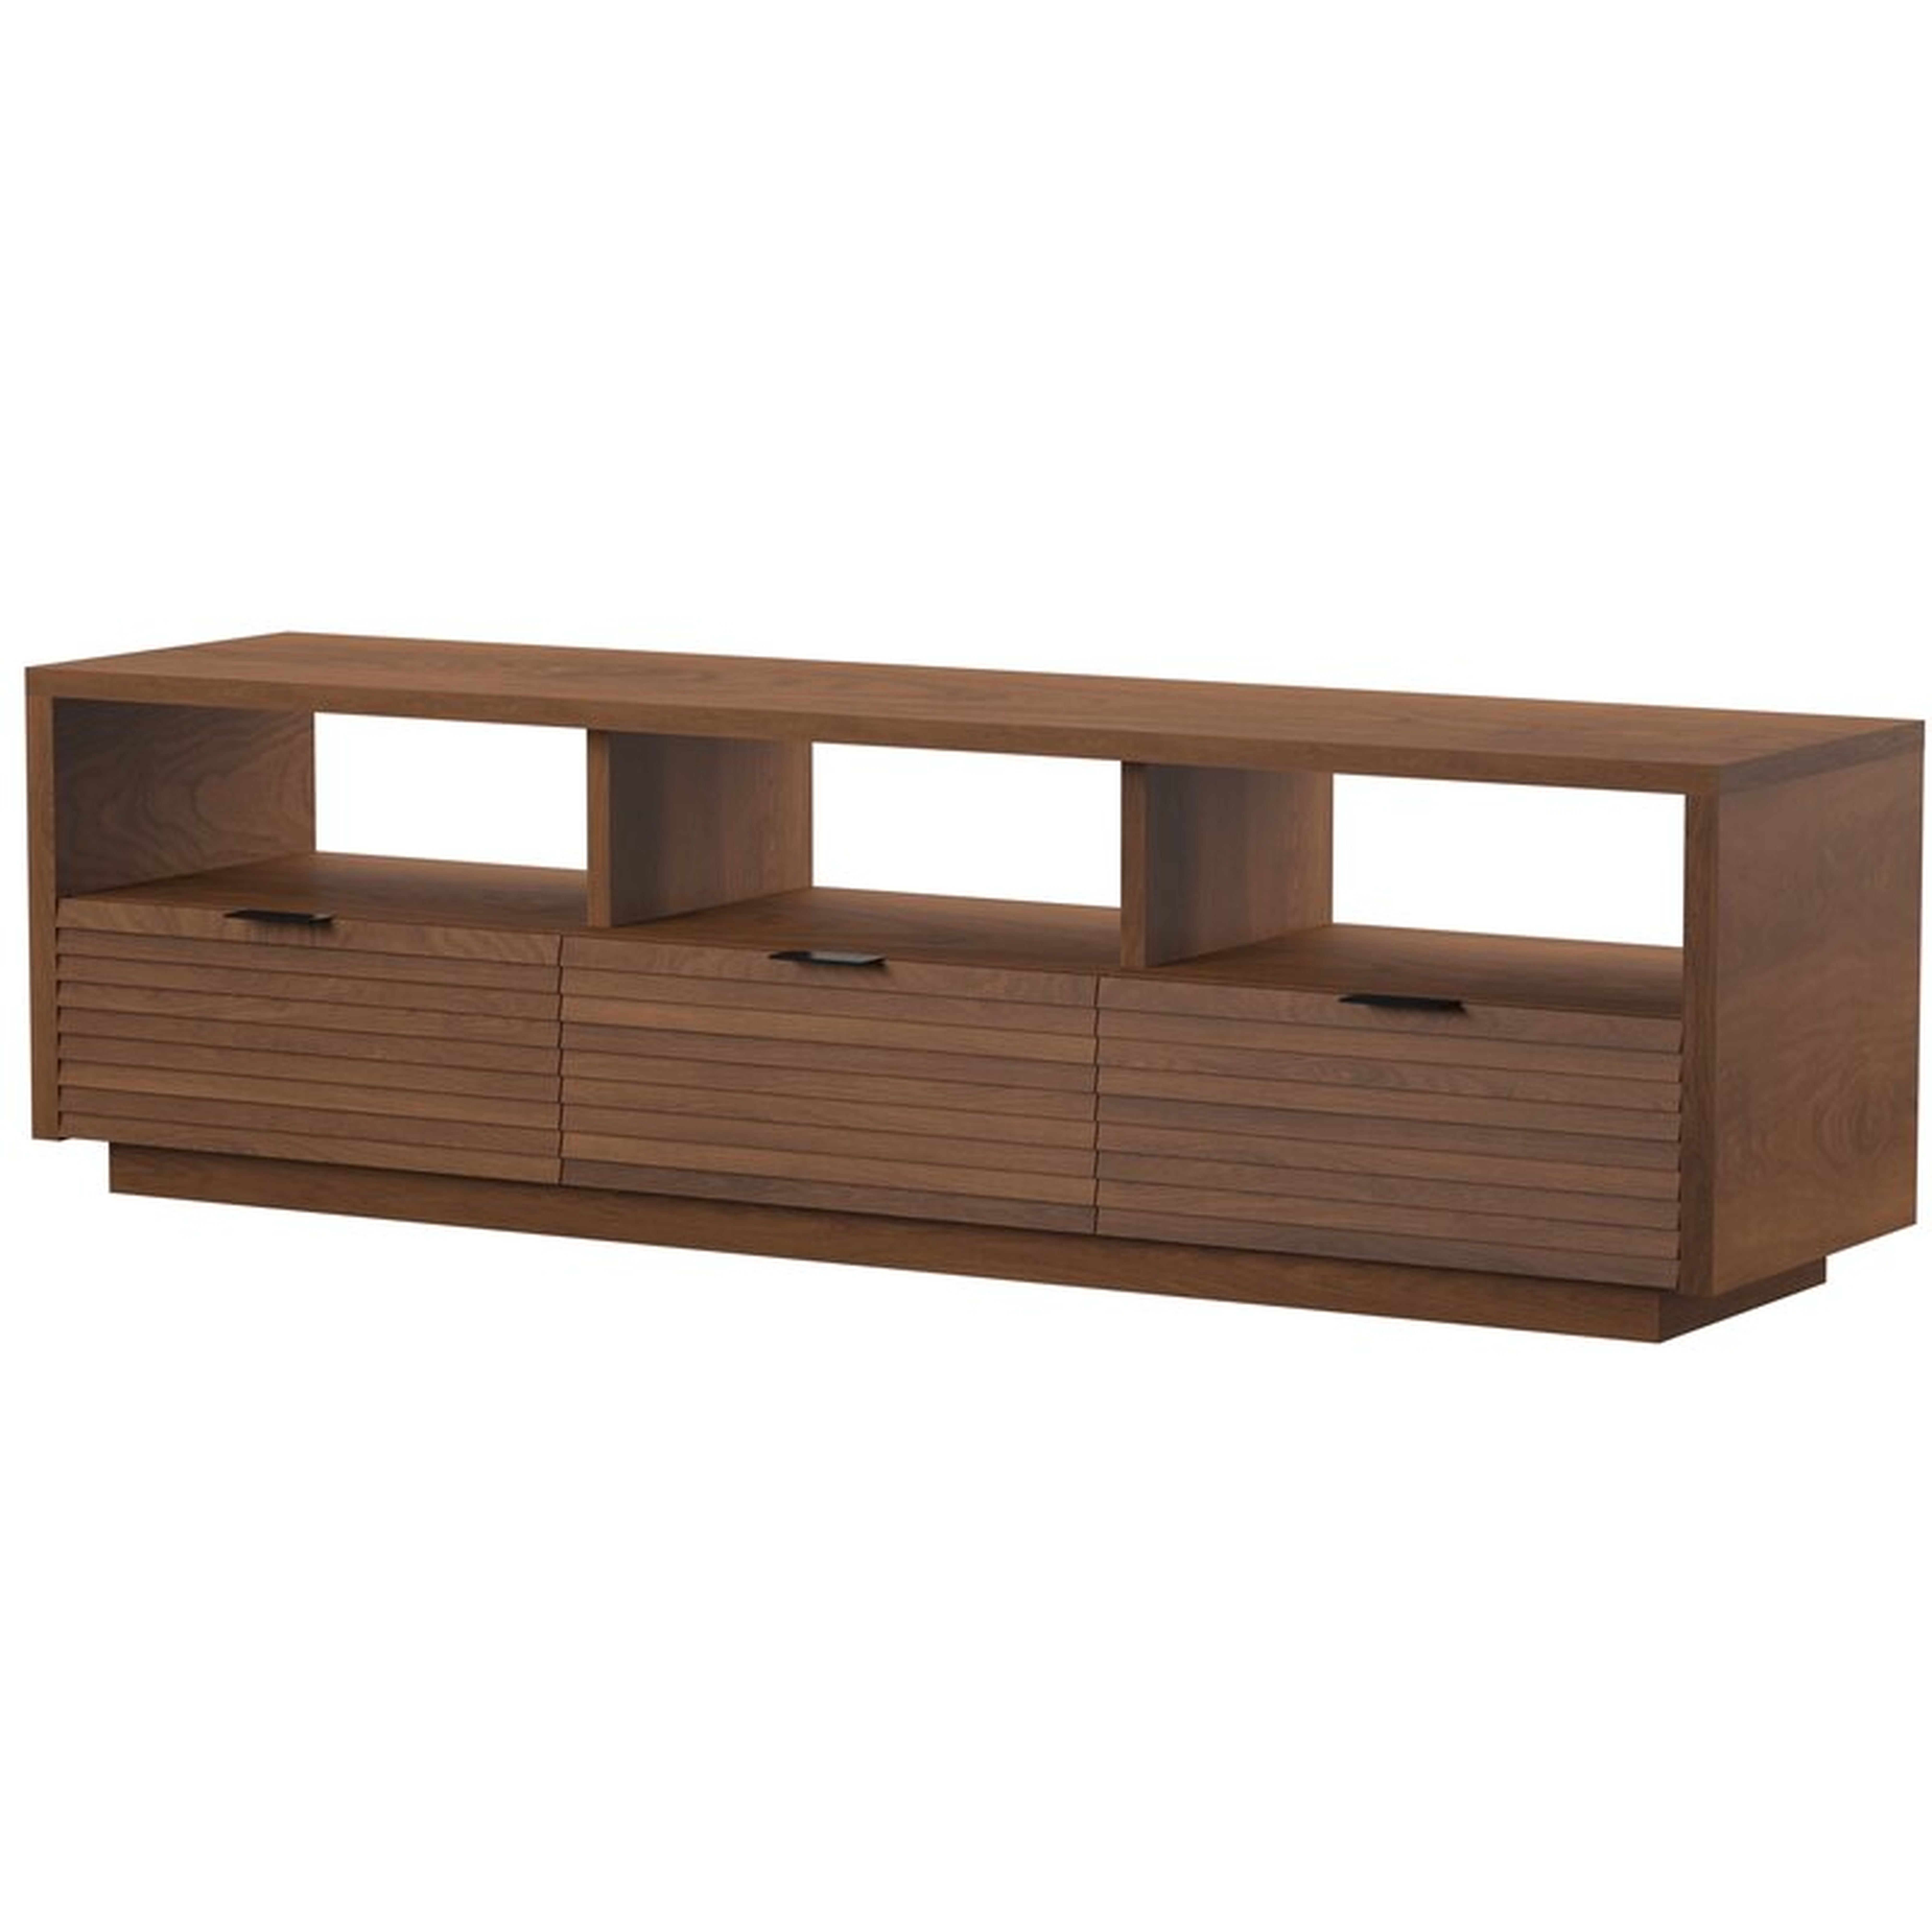 Posner TV Stand for TVs up to 70" - Wayfair